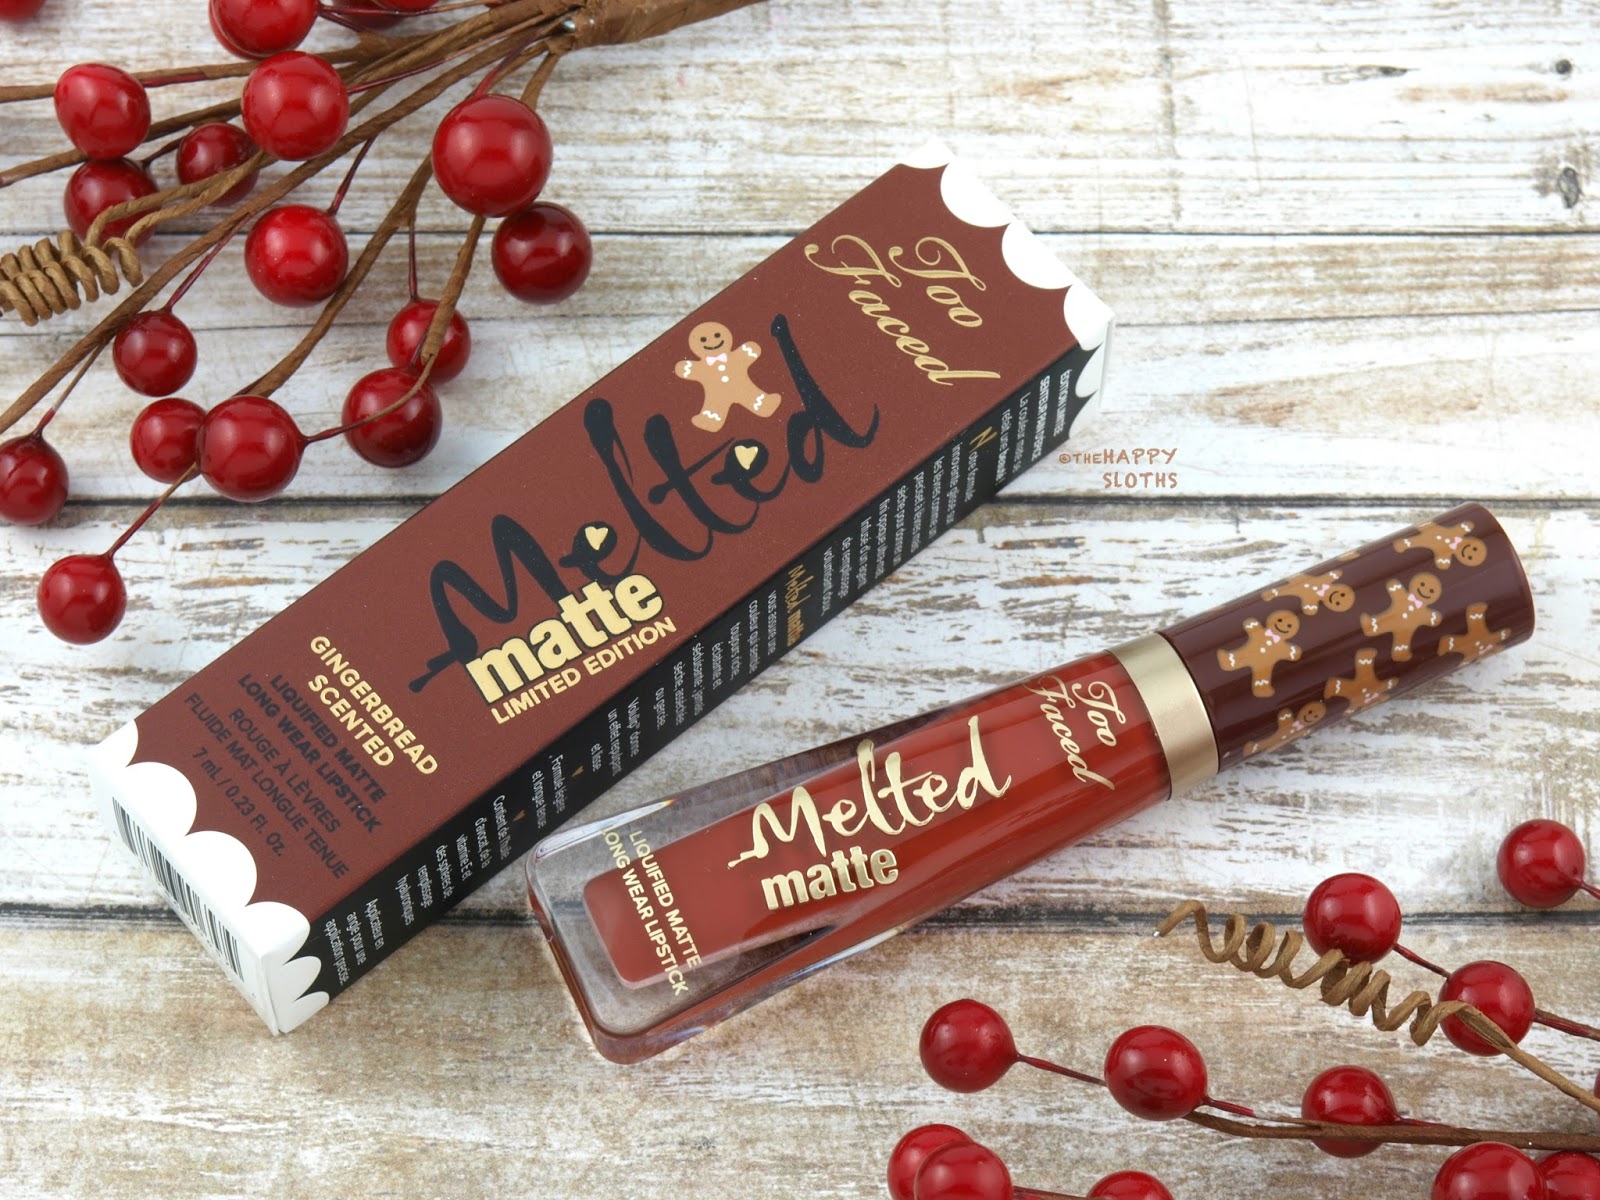 Too Faced Holiday 2017 | Melted Matte Liquified Lipstick in "Gingerbread Man": Review and Swatches